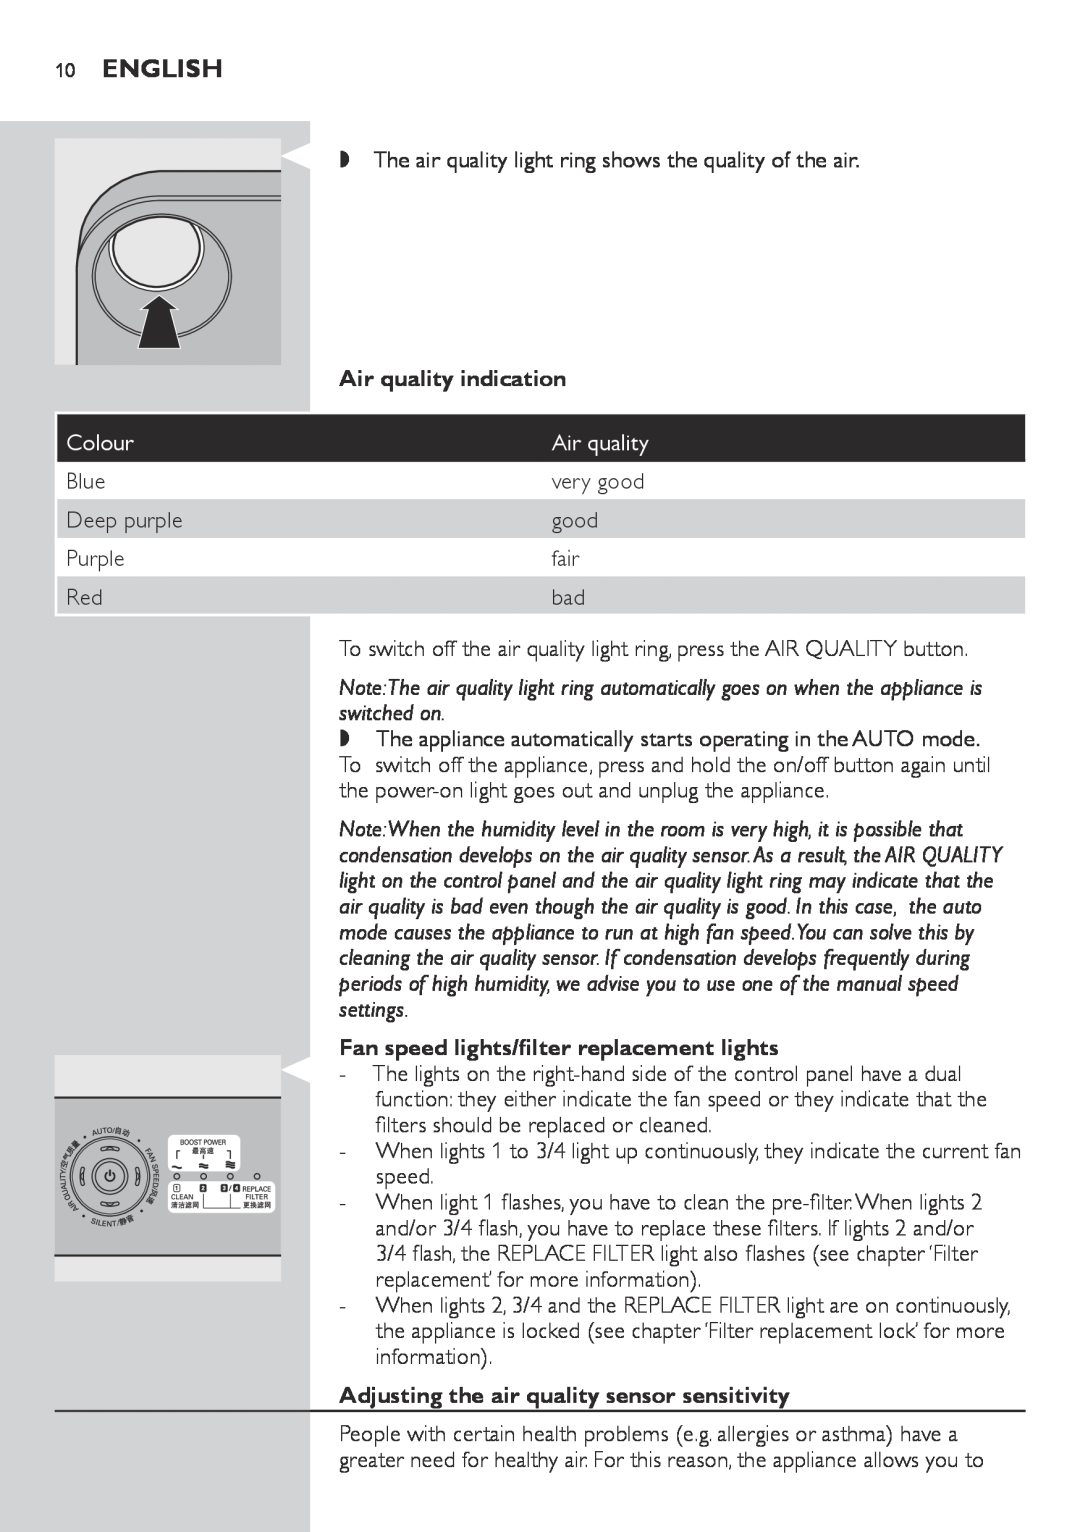 Philips AC4072, AC4074 user manual 10English, Air quality indication, Colour, Fan speed lights/filter replacement lights 